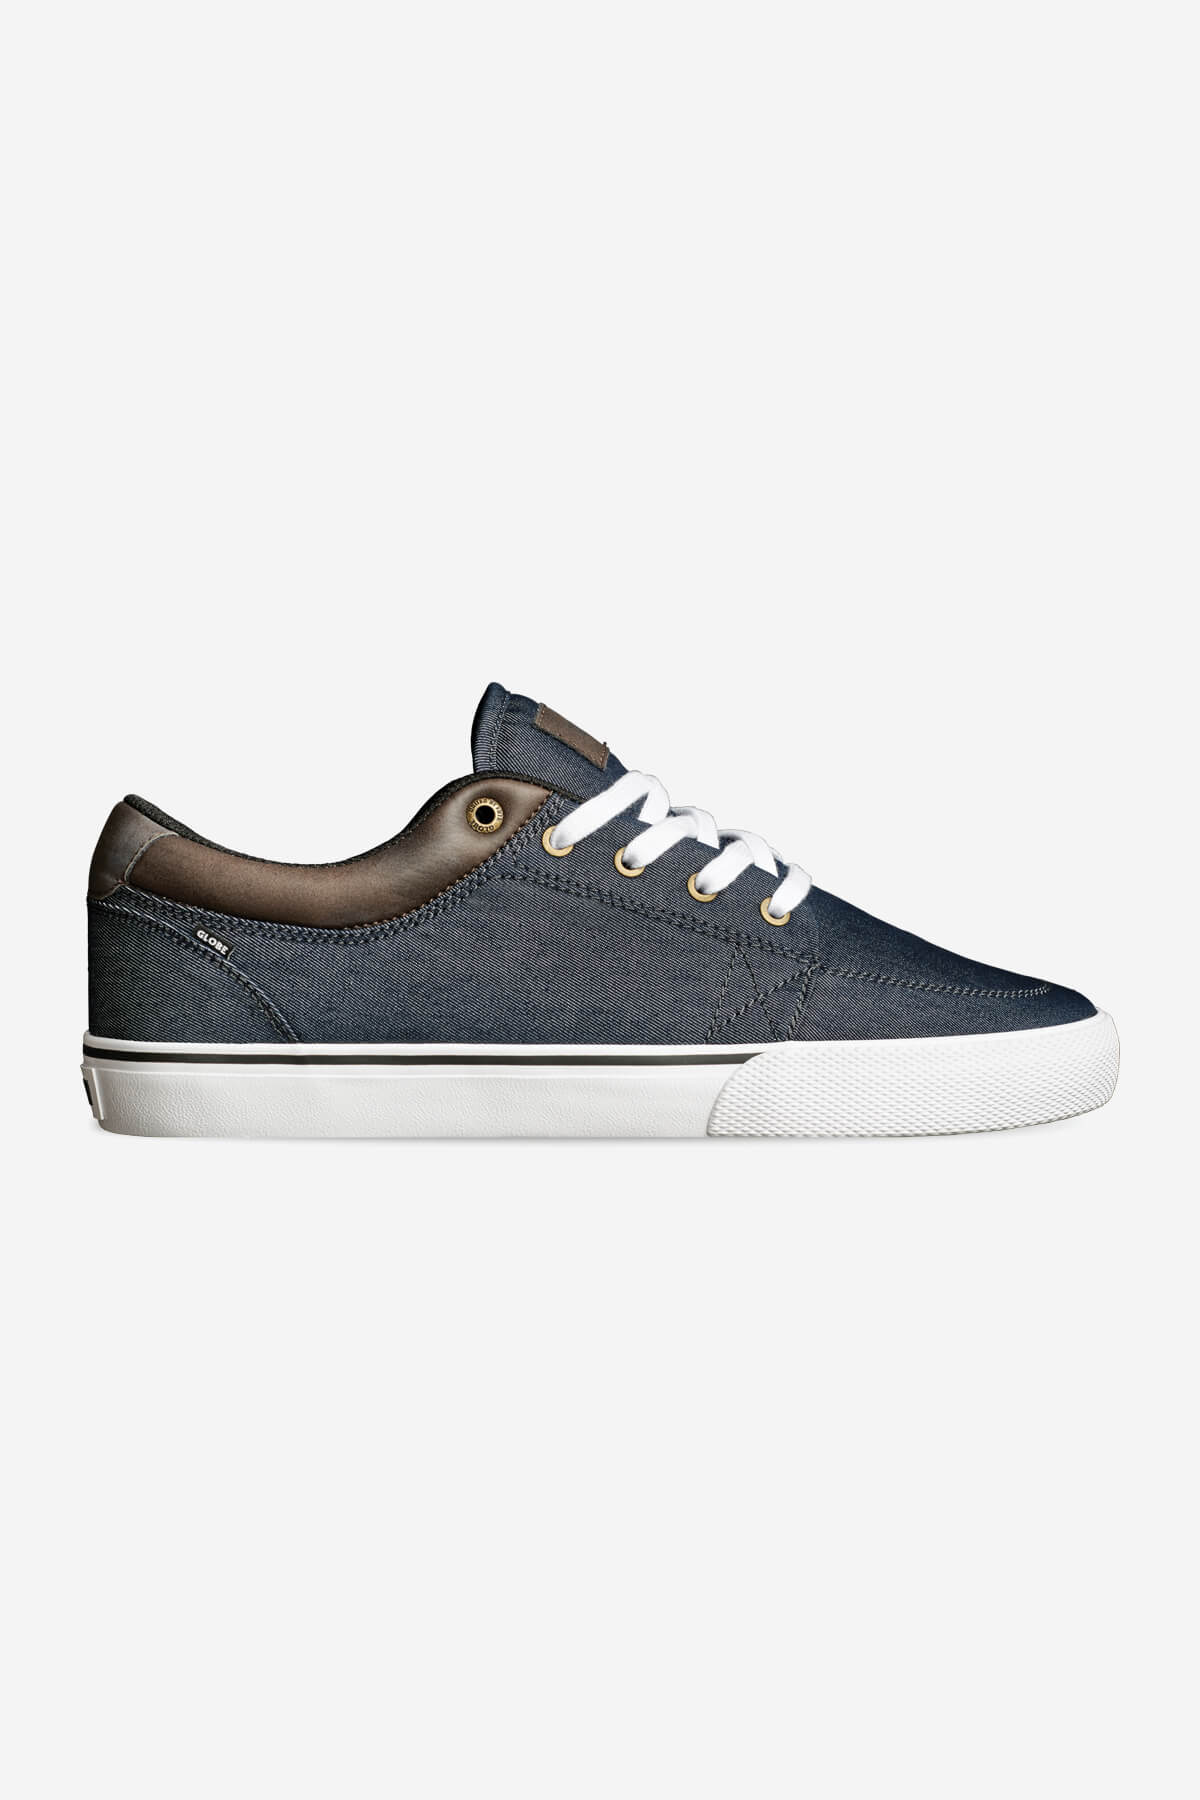 Globe Low shoes GS skate shoes in Dark Denim/White